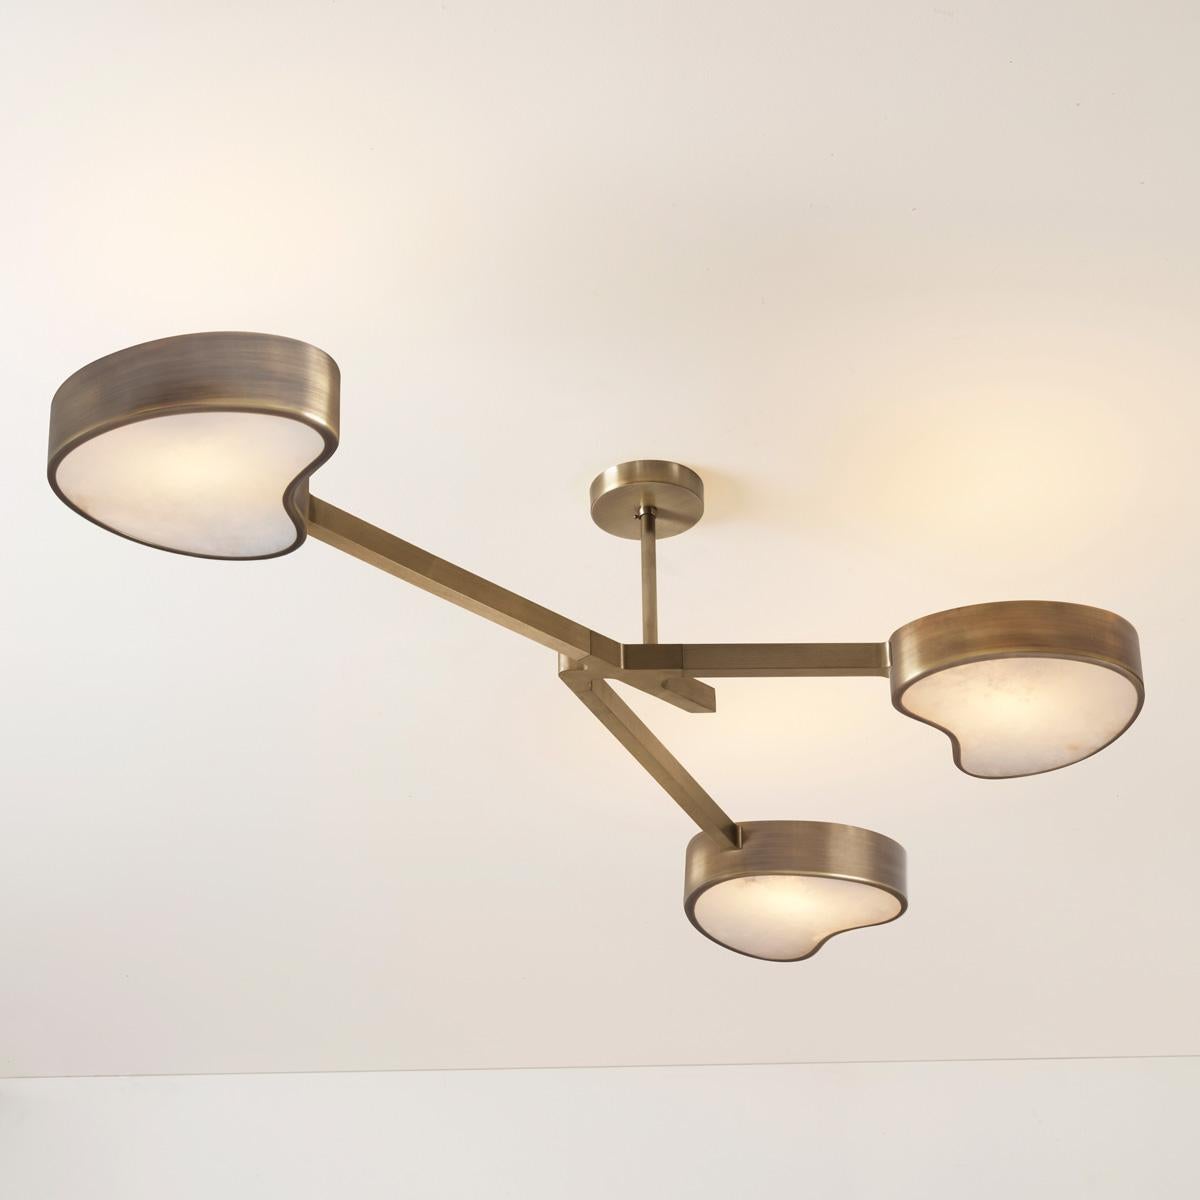 Cuore N.3 Ceiling Light by Gaspare Asaro. Peltro and Bronze Finish For Sale 7